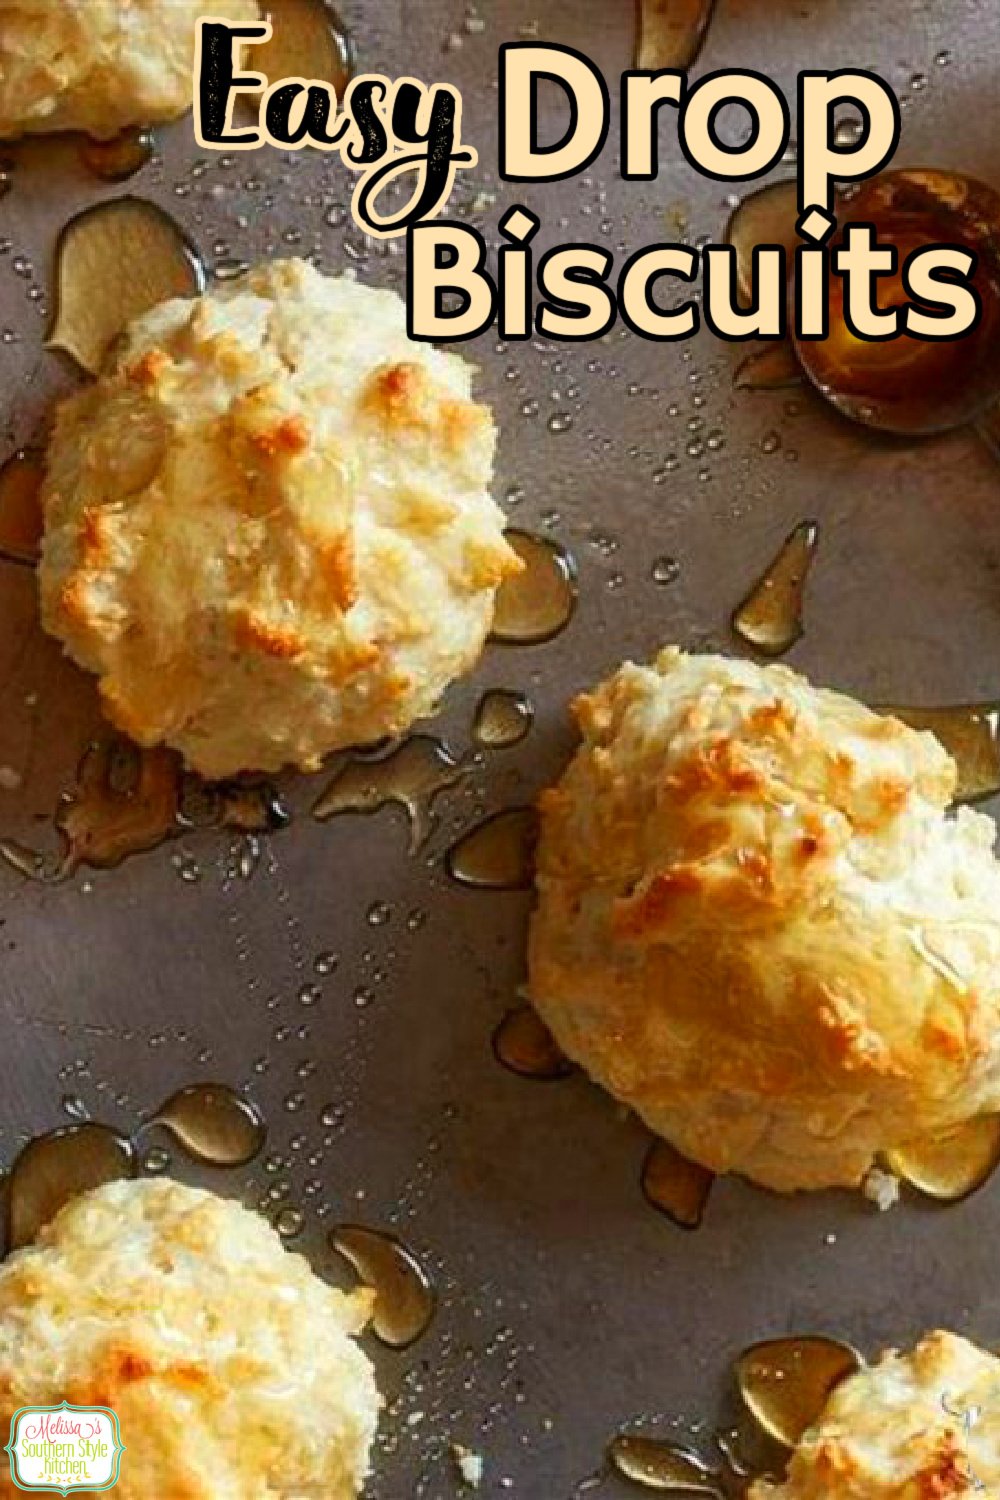 Whip-up a batch of these Easy Drop Biscuits for any meal #dropbiscuits #southernbiscuits #buttermilkbiscuits #bestbiscuitrecipes #breakfast #brunch #southernfood #holidaybaking #holidaybrunch #southernrecipes #biscuits via @melissasssk